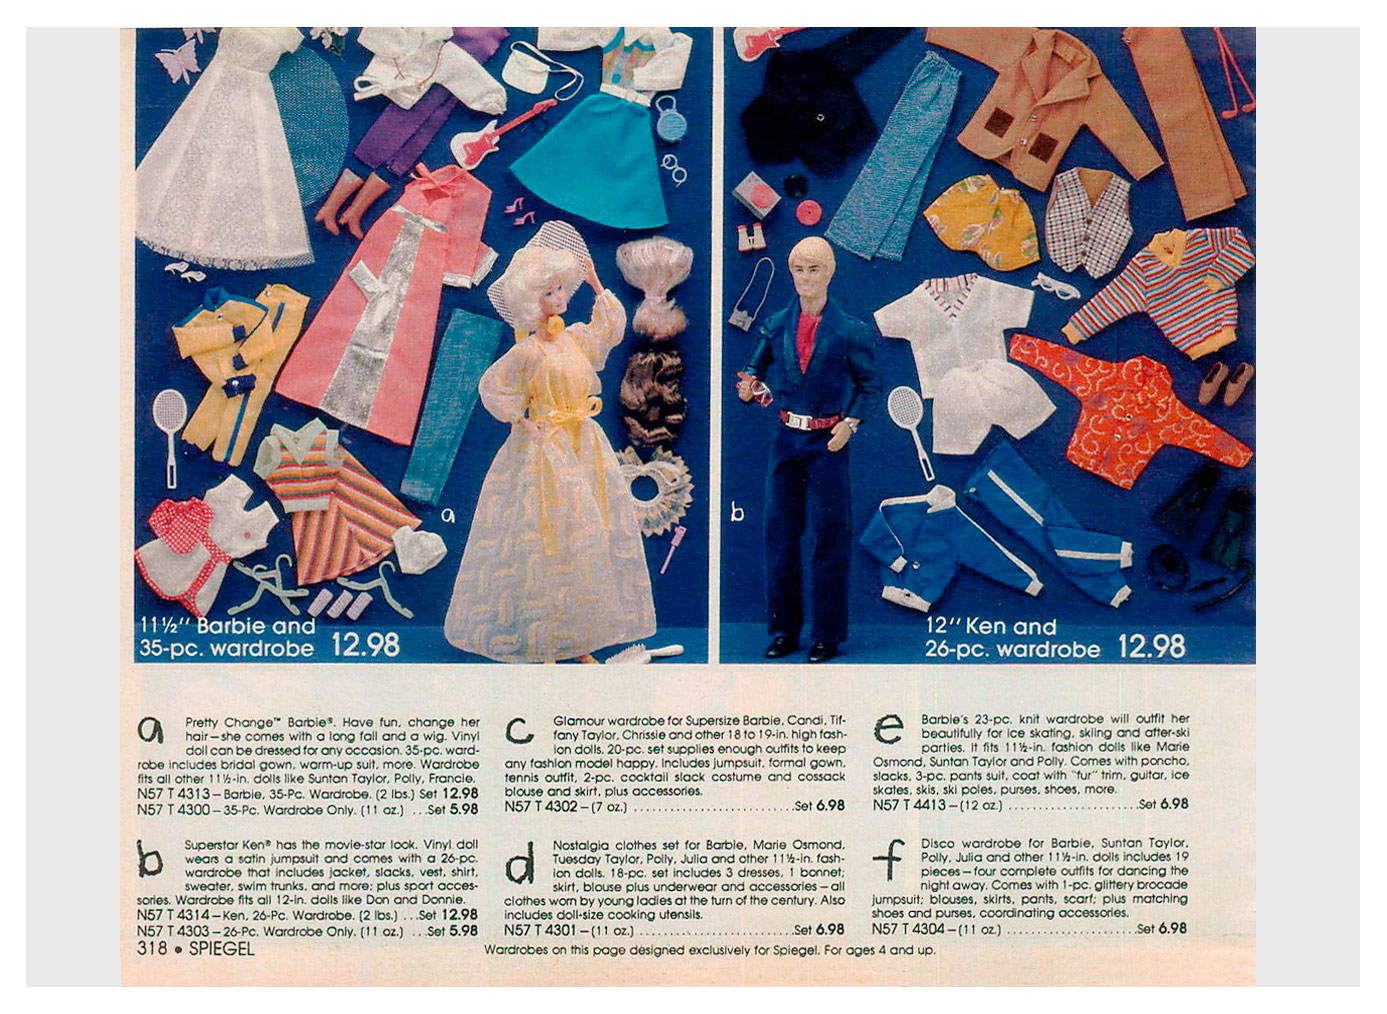 From 1979 Spiegel Christmas catalogue